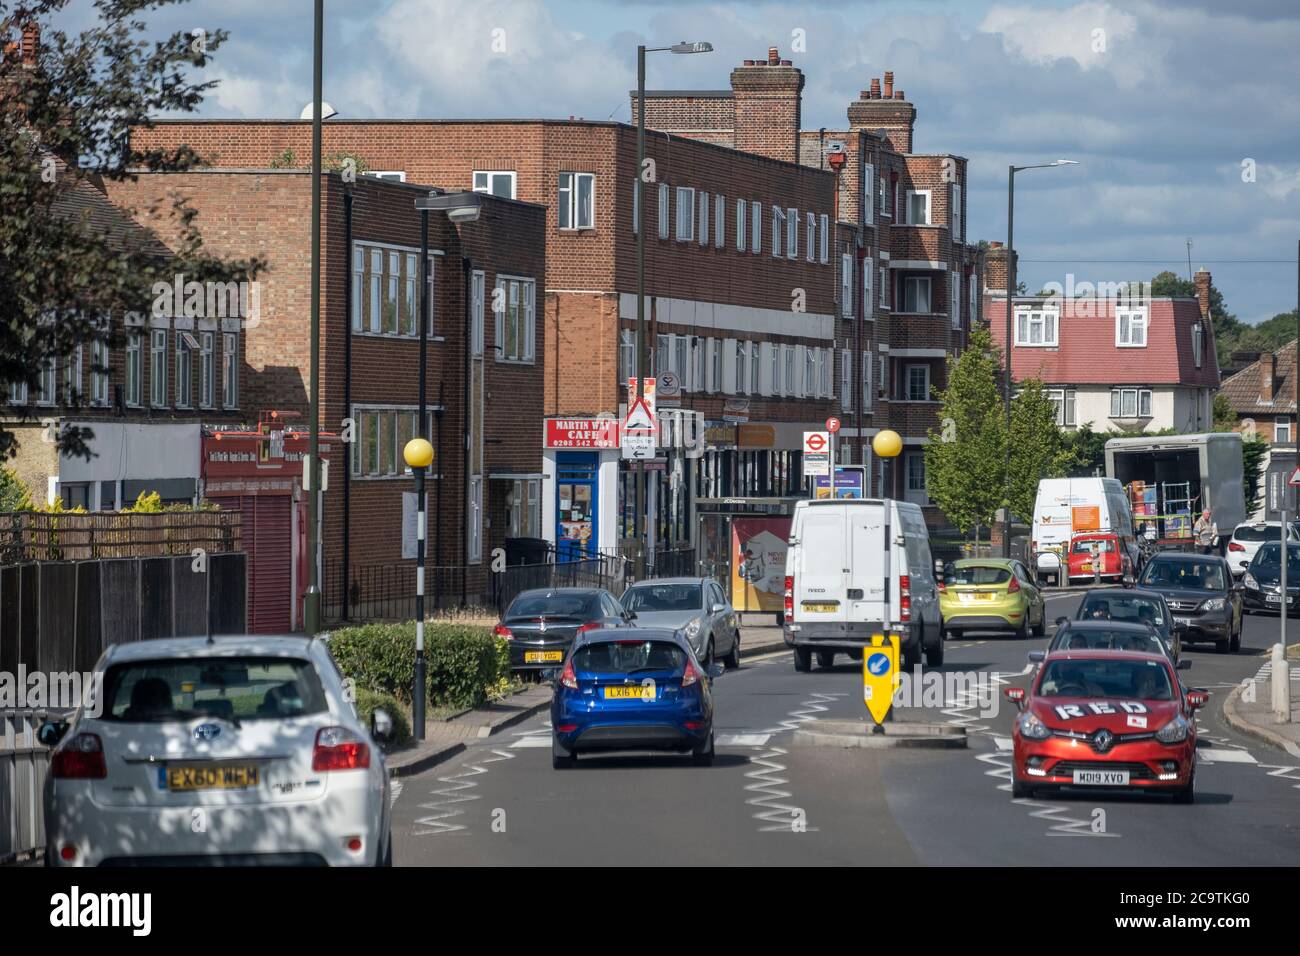 Suburban traffic and mixed architecture in Morden, Surrey Stock Photo